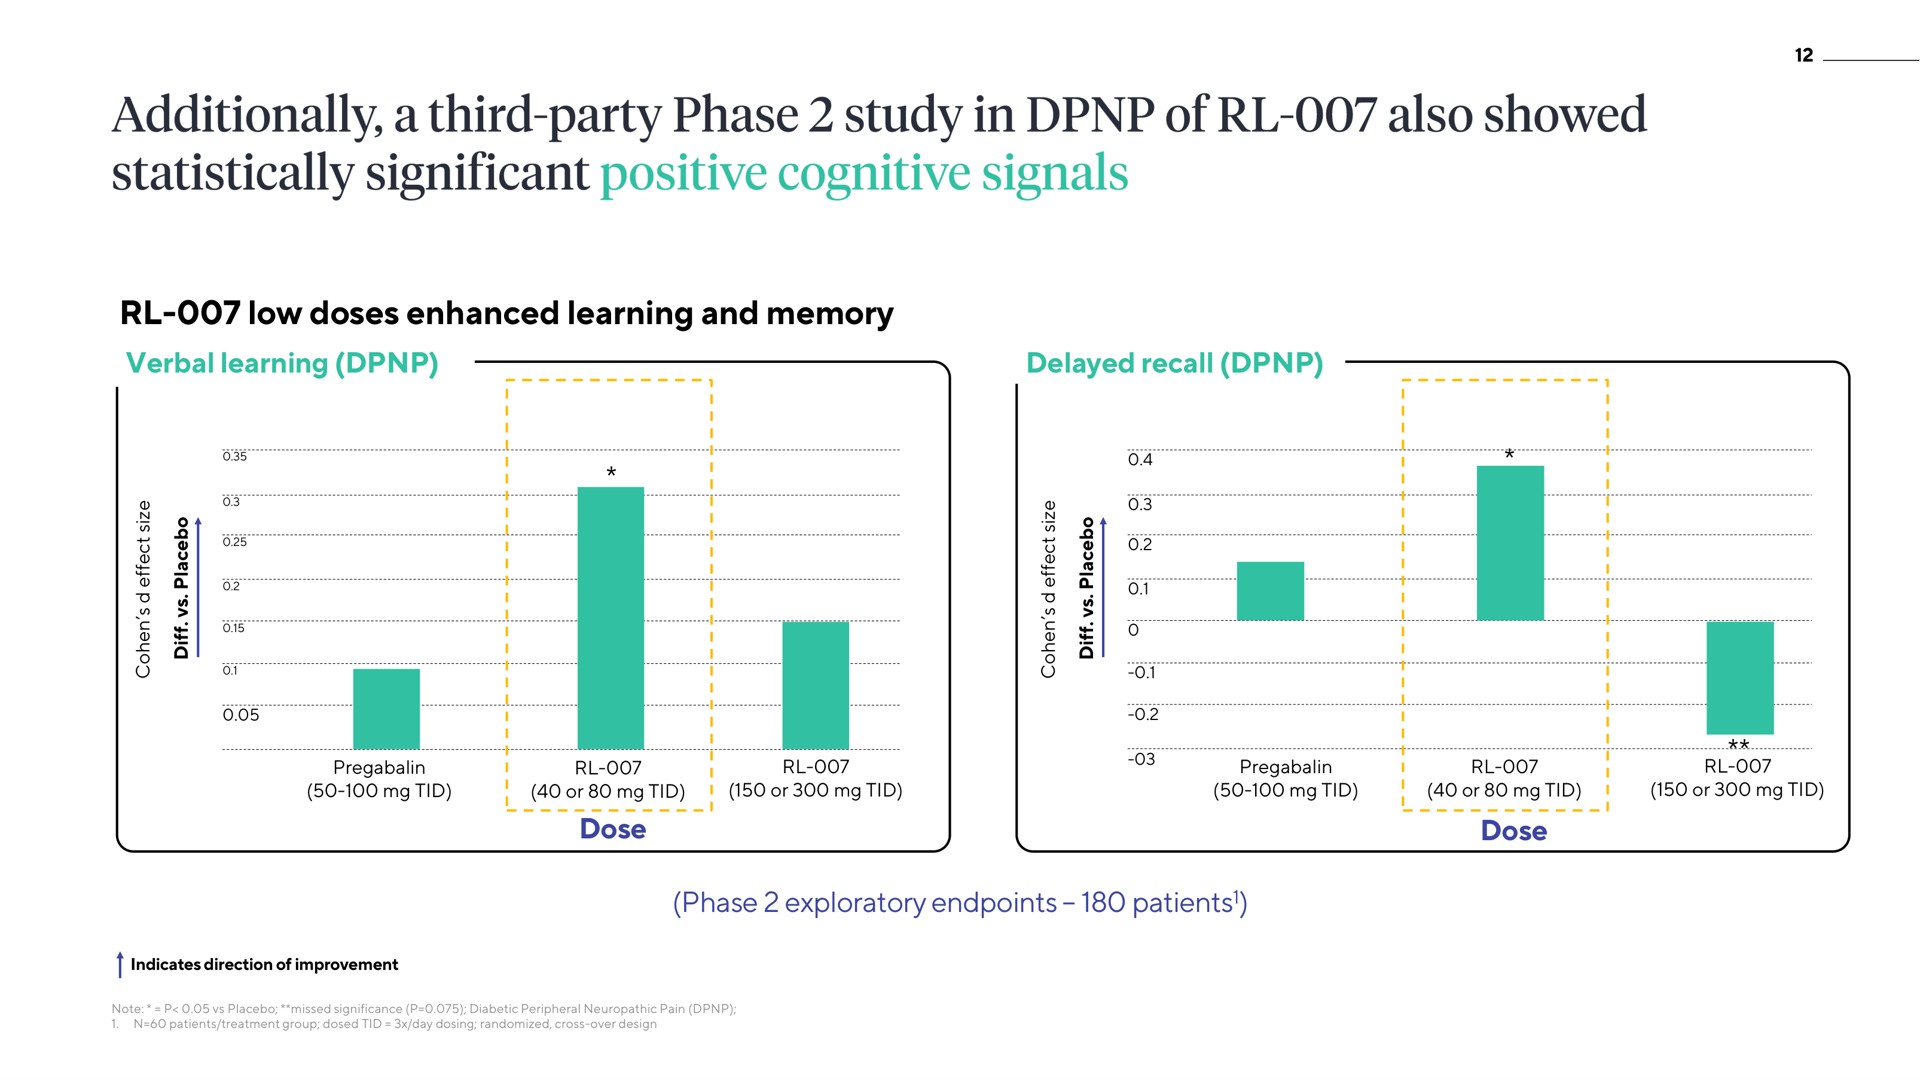 dose low doses enhanced learning and memory verbal learning delayed recall dose phase exploratory patients additionally a third party study in of also showed statistically significant positive cognitive signals | ATAI